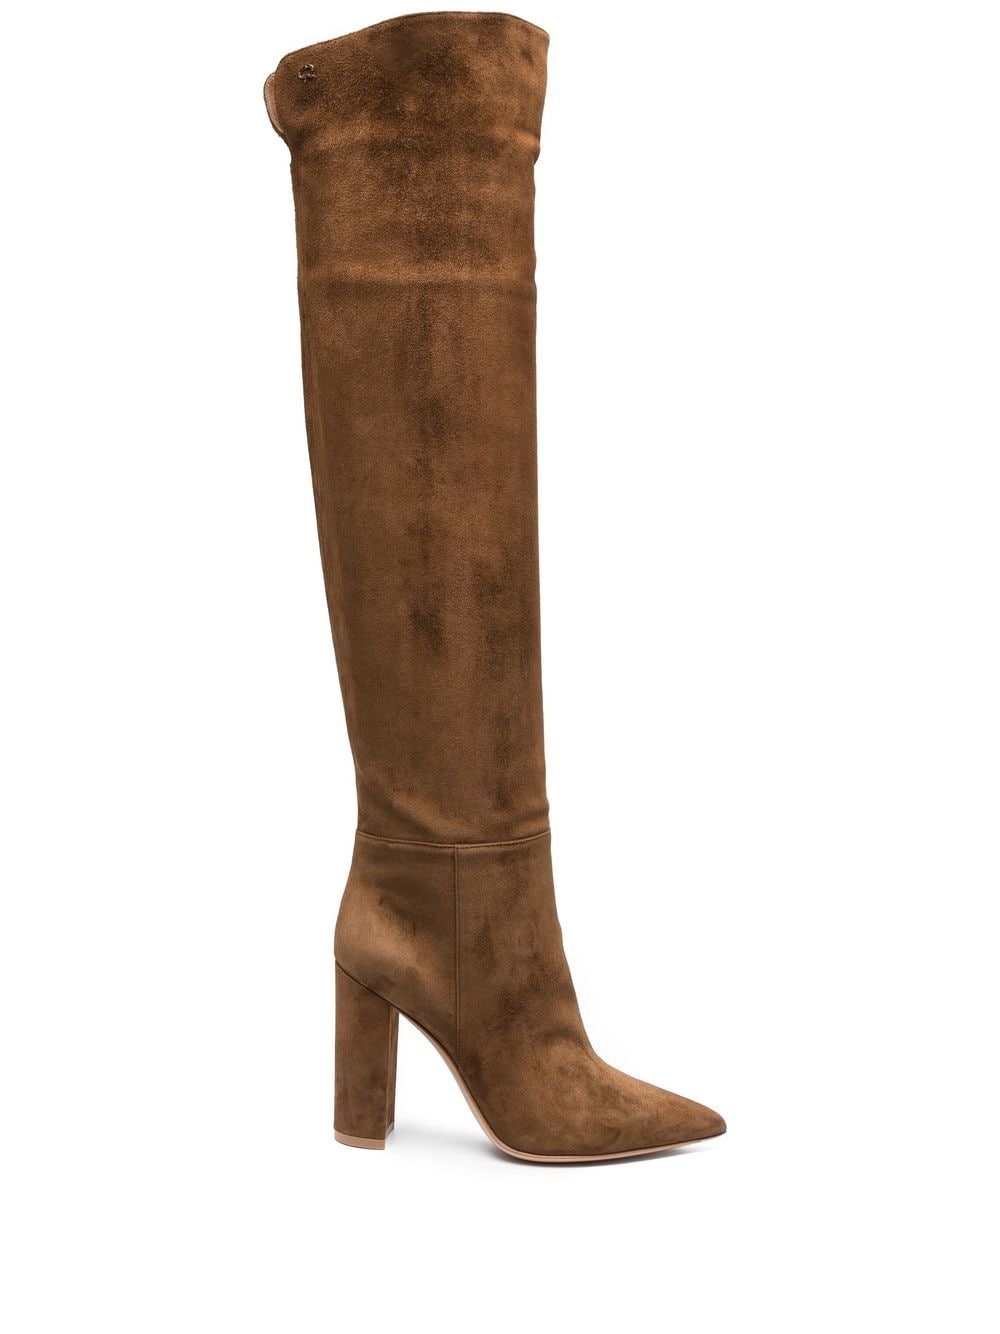 Gianvito Rossi pointed 100mm suede boots - Brown von Gianvito Rossi